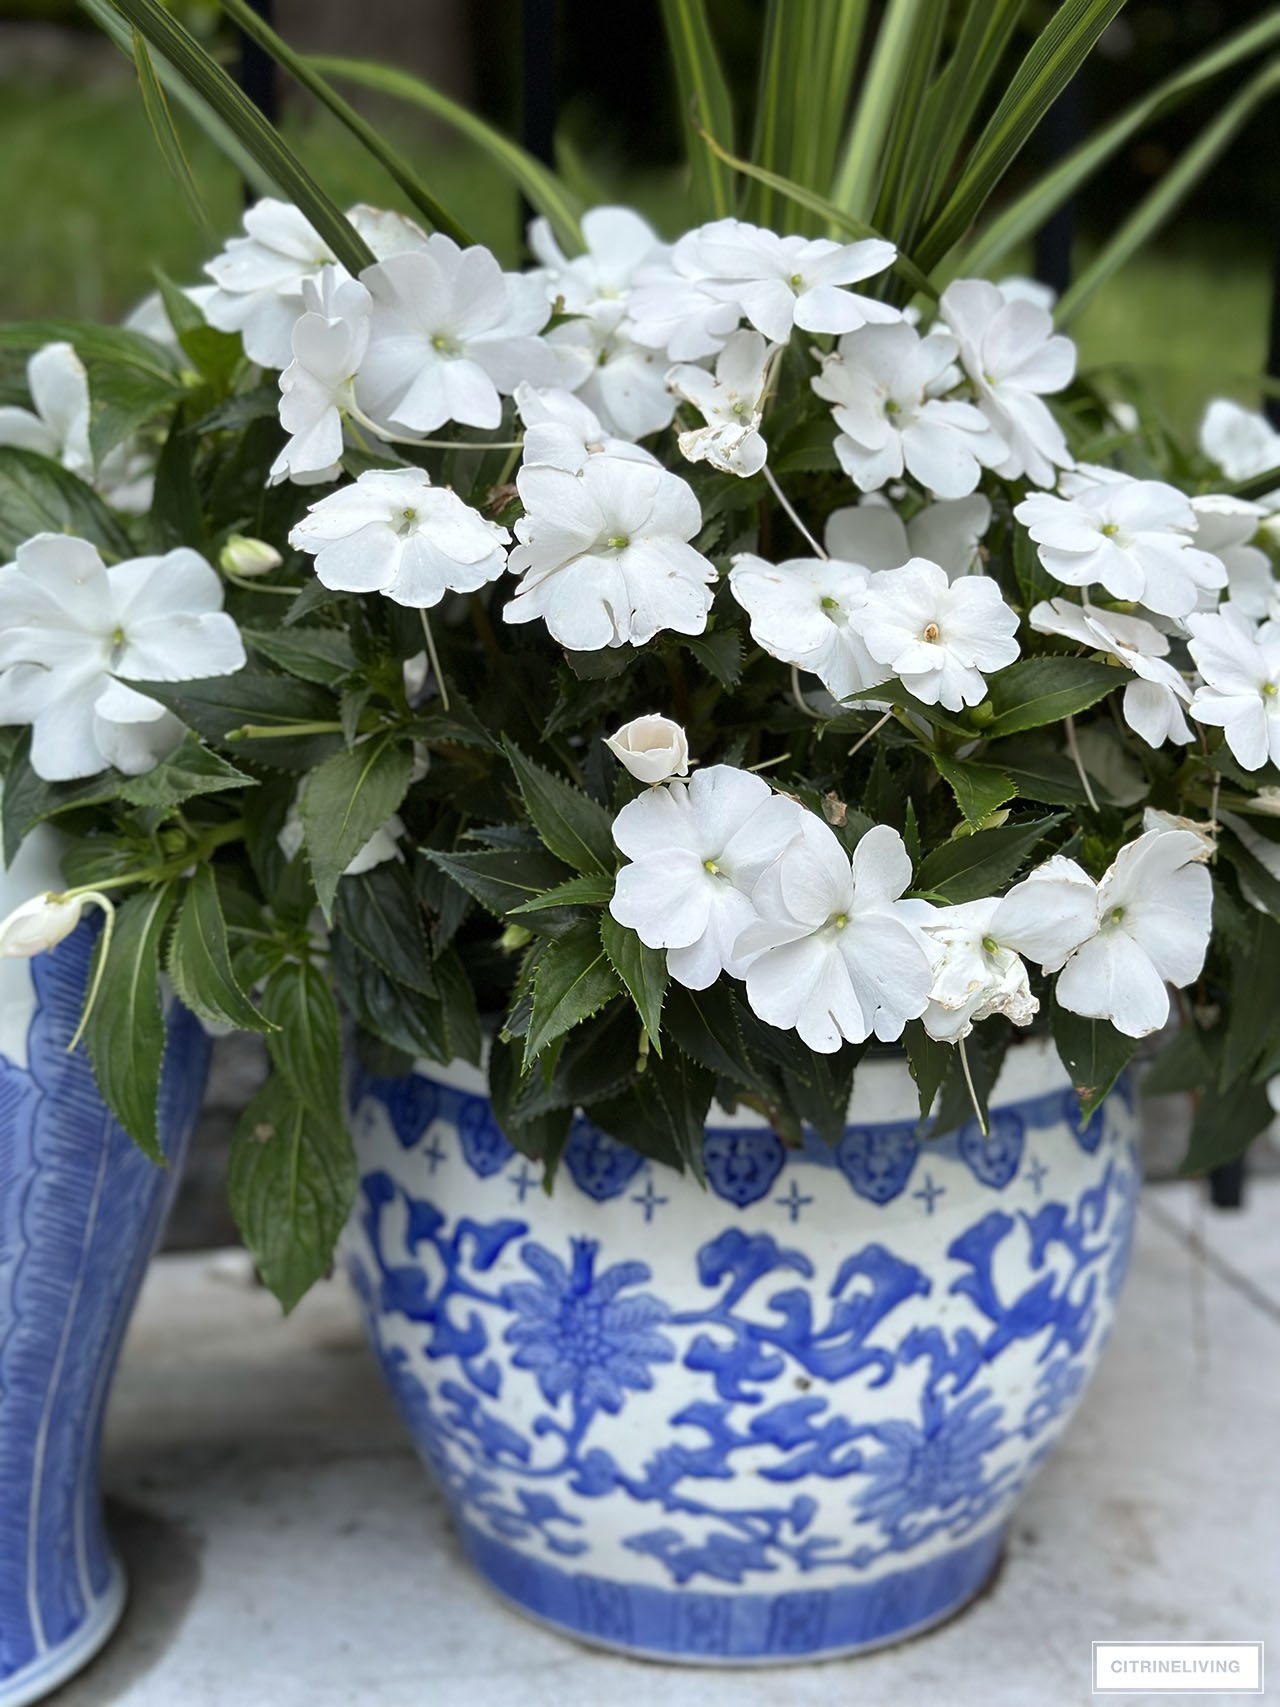 Blue and white planter with White New Guinea Impatiens